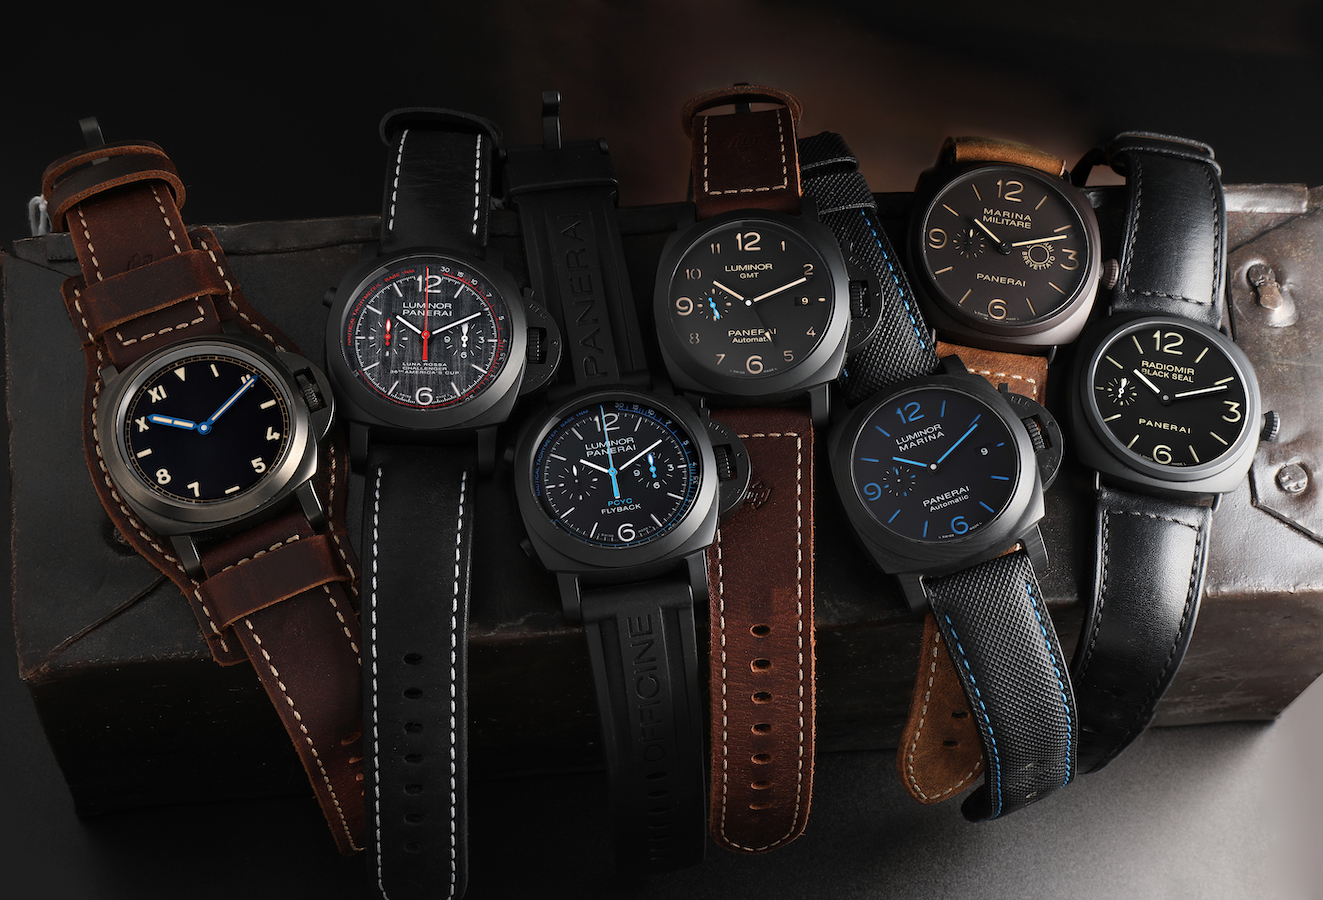 Ethos Watches | Luxury Watch Retailer for Swiss Watches & More